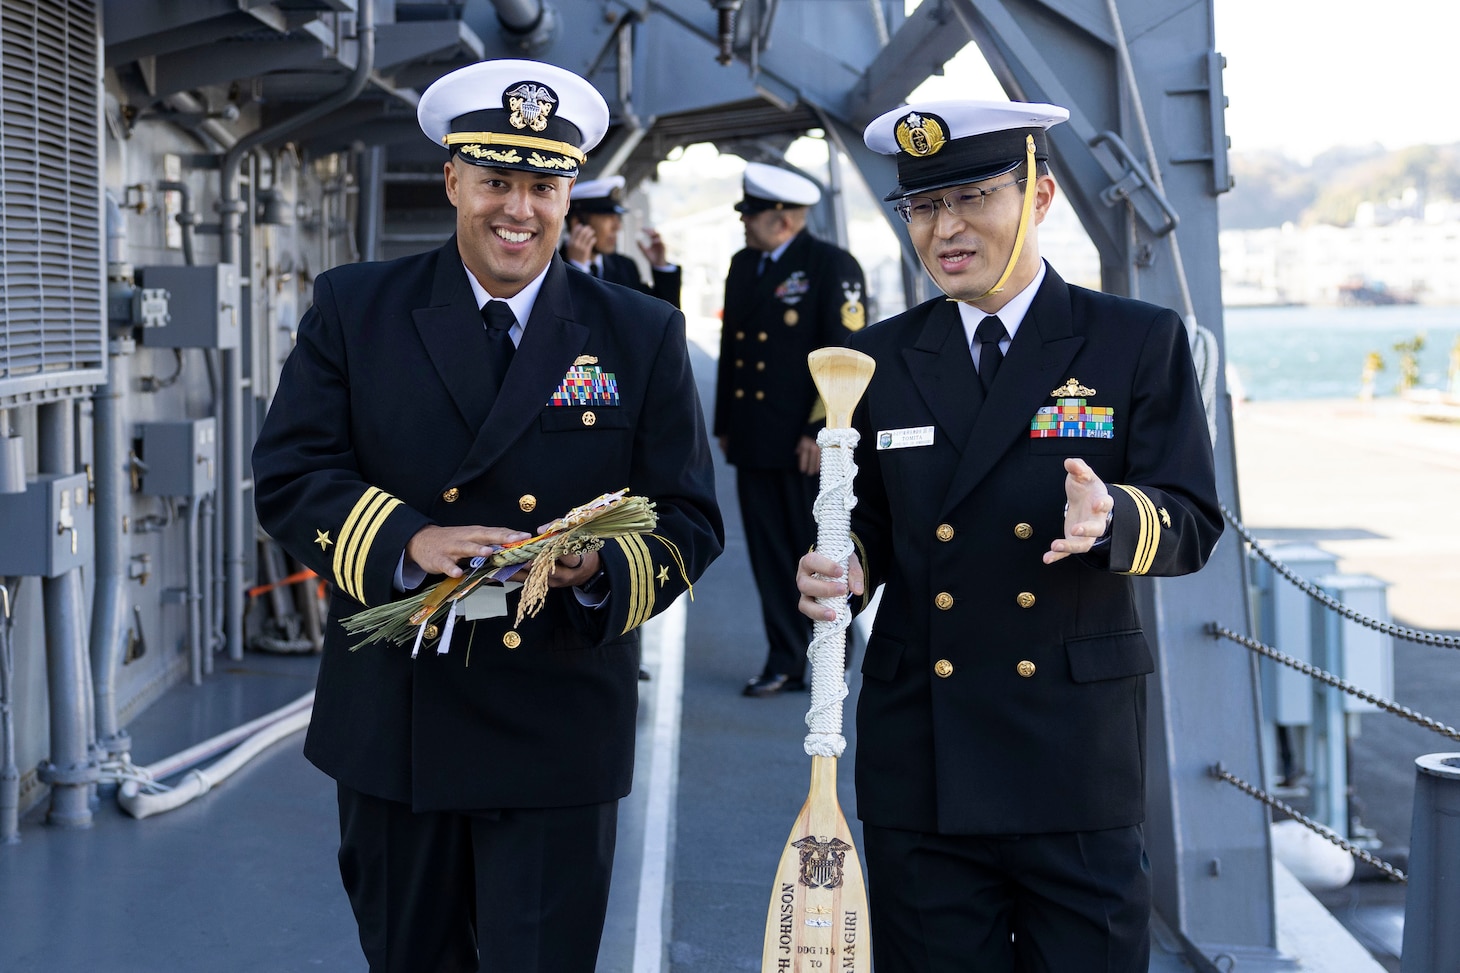 231207-N-NF288-0168 YOKOSUKA, Japan (Dec. 7, 2023) Cmdr. Justan Caesar, executive officer of the Arleigh Burke-class guided-missile destroyer USS Ralph Johnson (DDG 114), left, speaks with Lt. Cmdr. Tomita Naoaki, executive officer of the Asagiri-class destroyer JS Amagiri (DD-154), right, during the annual sister ship traditional gift exchange, Dec. 7. Ralph Johnson is forward-deployed and assigned to Commander, Task Force 71/Destroyer Squadron (DESRON) 15, the Navy’s largest DESRON and the U.S. 7th Fleet’s principal surface force. (U.S. Navy photo by Mass Communication Specialist 1st Class Jamaal Liddell)